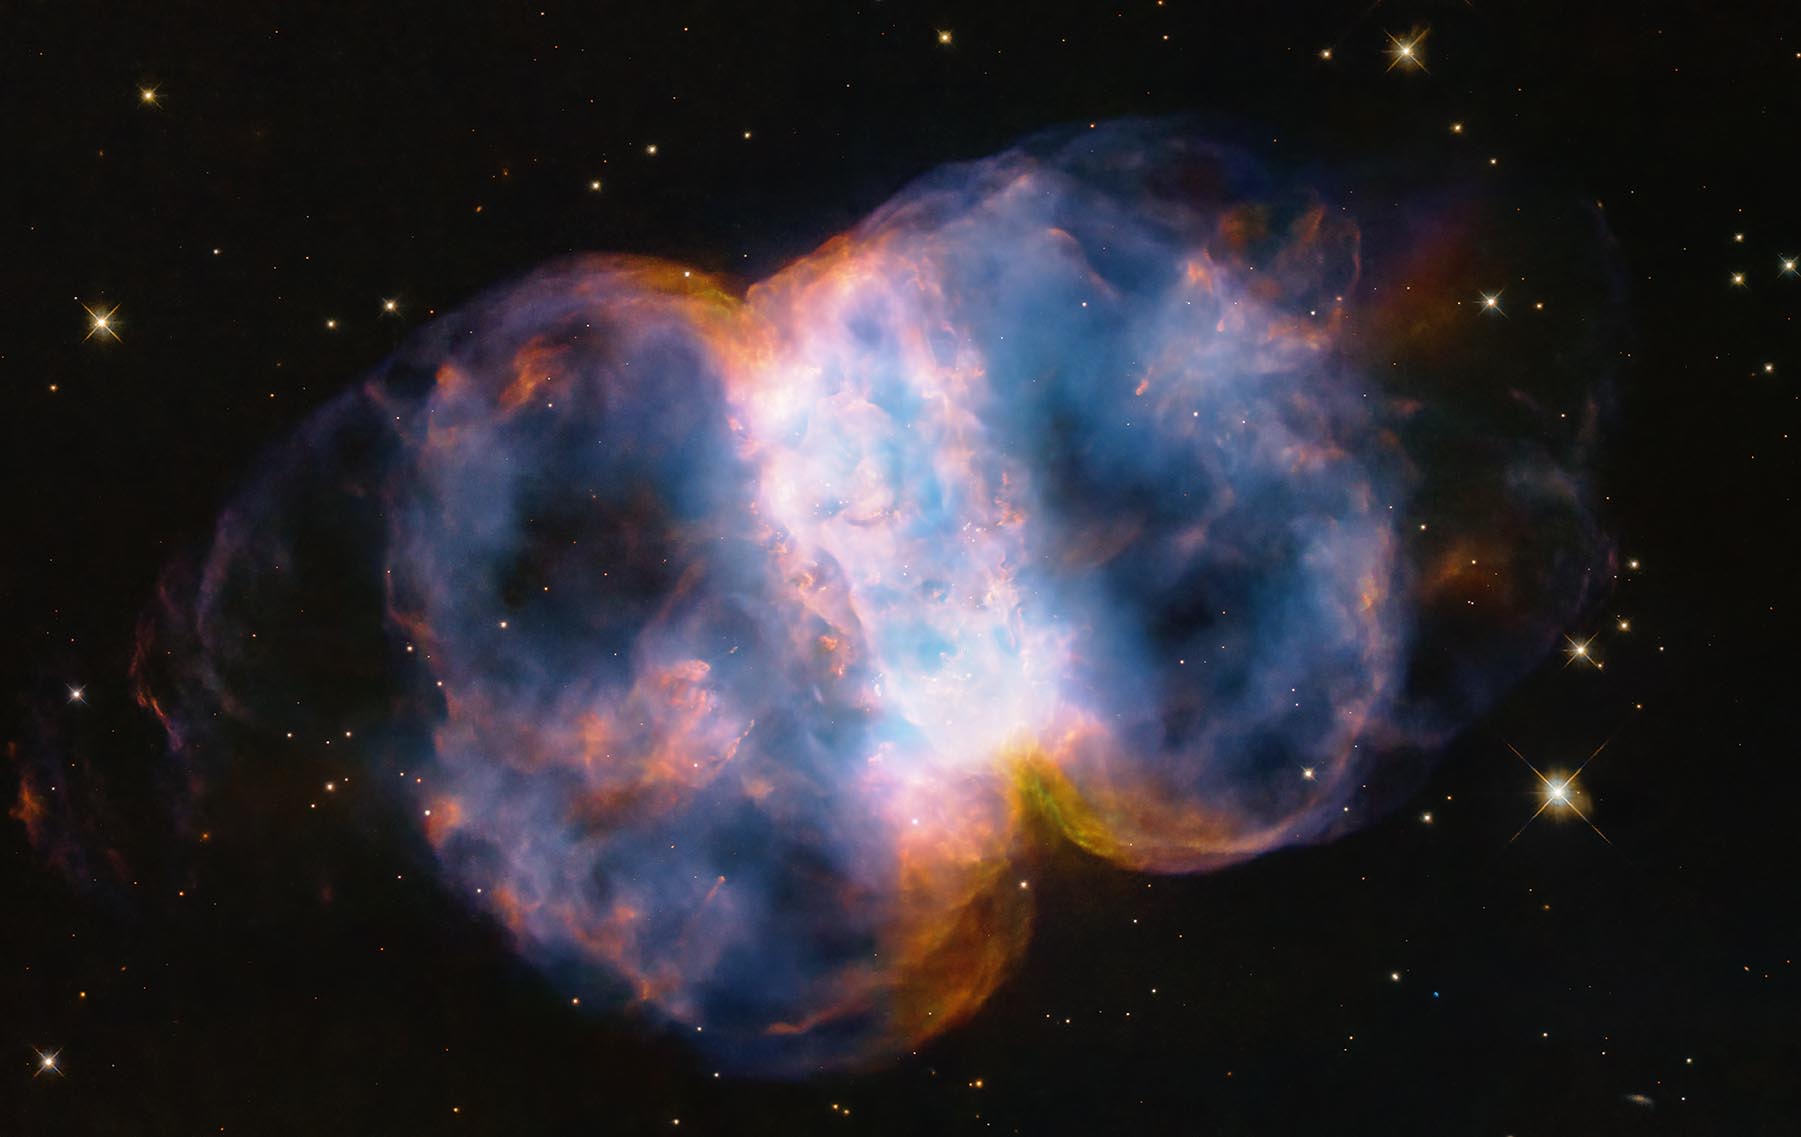 Taking up most of the image, is a multi-colored nebula appearing as two translucent orbs attached by a white band.